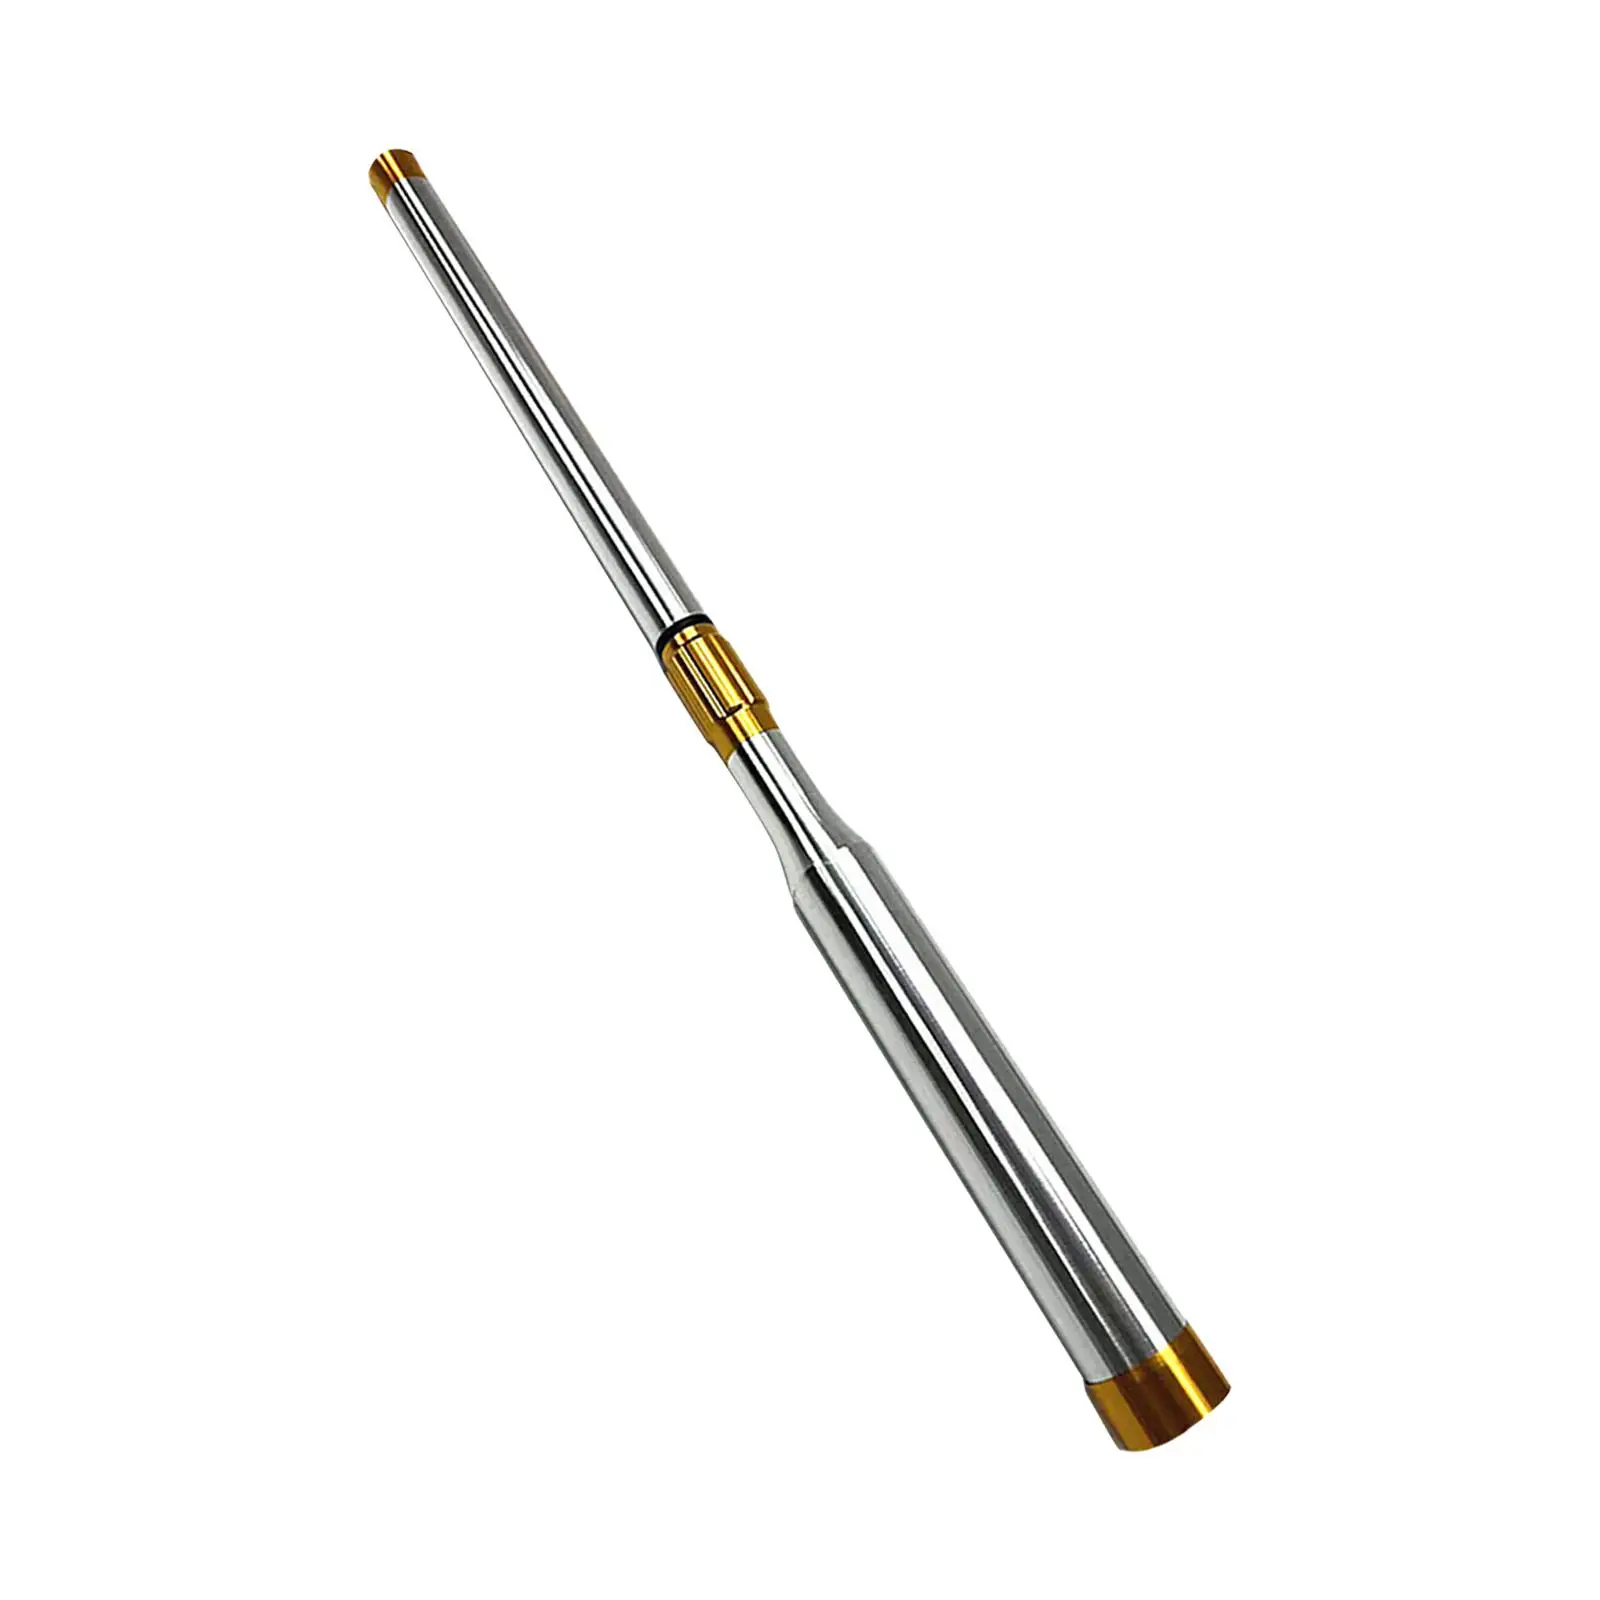 Snooker Pool Cue Extender Tool Telescopic Aluminum Alloy High Strength Professional Ultralight Billiards Cue Extension Parts